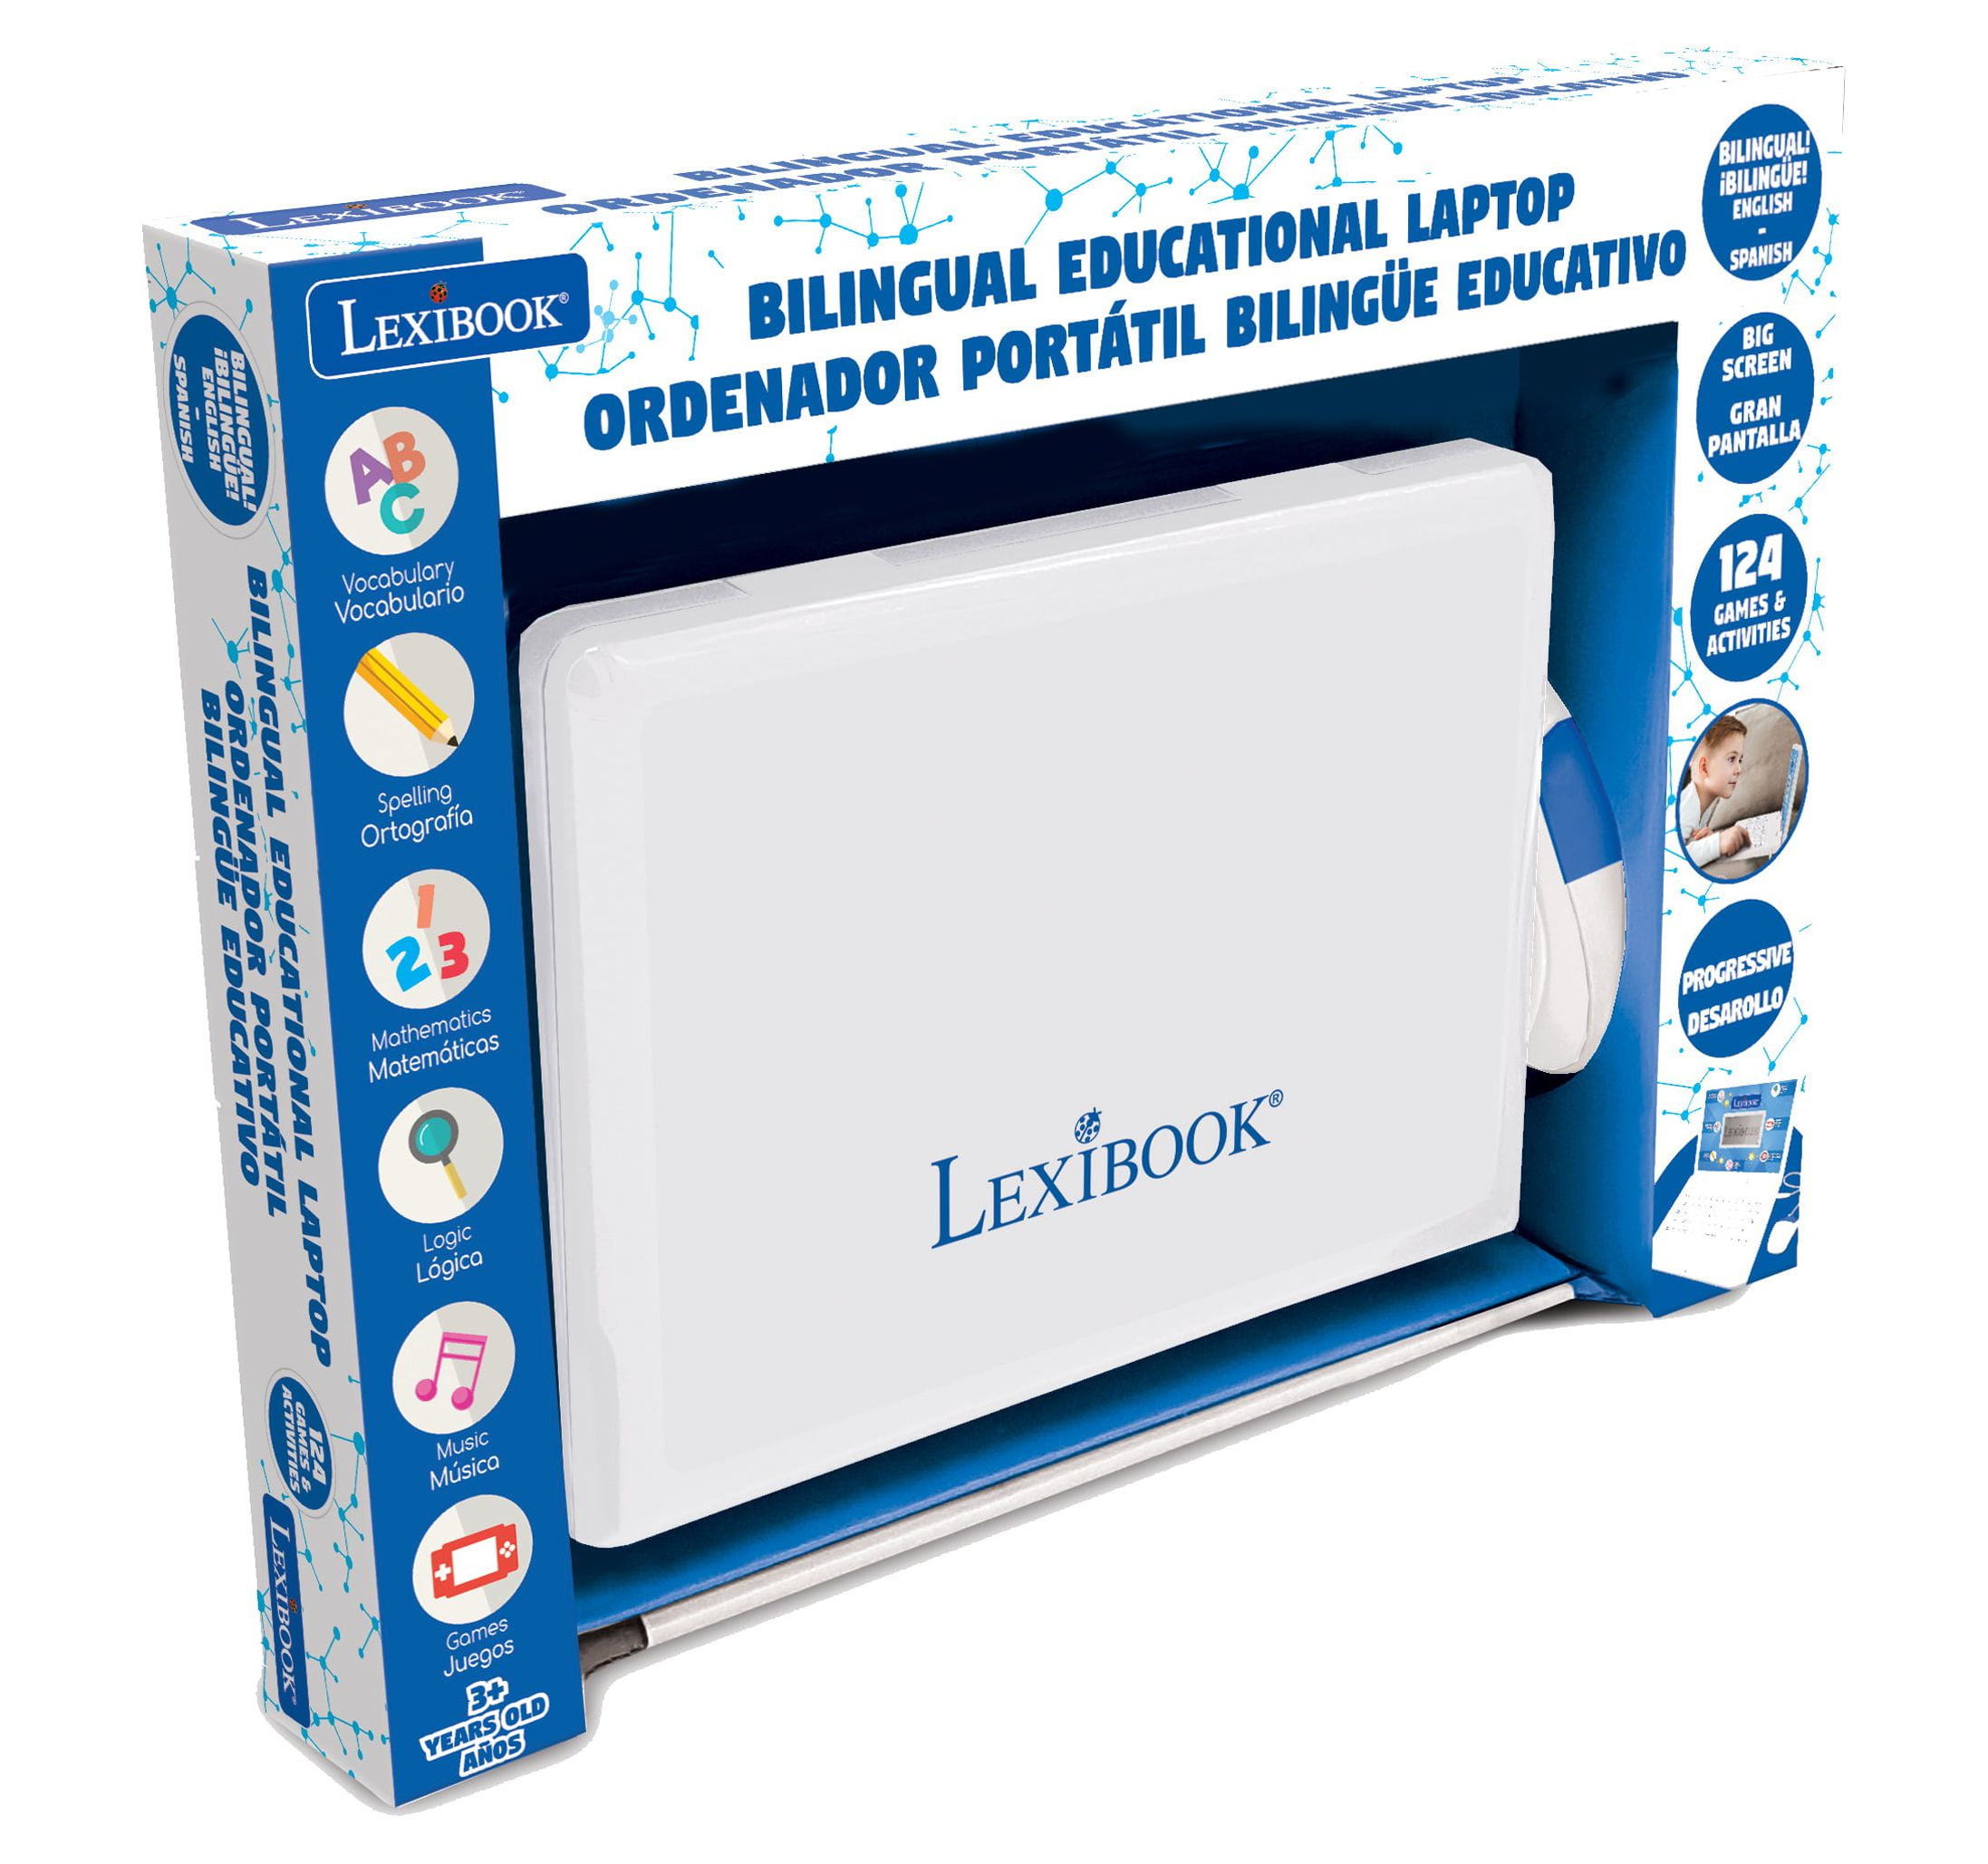 Lexibook Should Learn a Lesson About Pricing Its 'Educational' Netbook